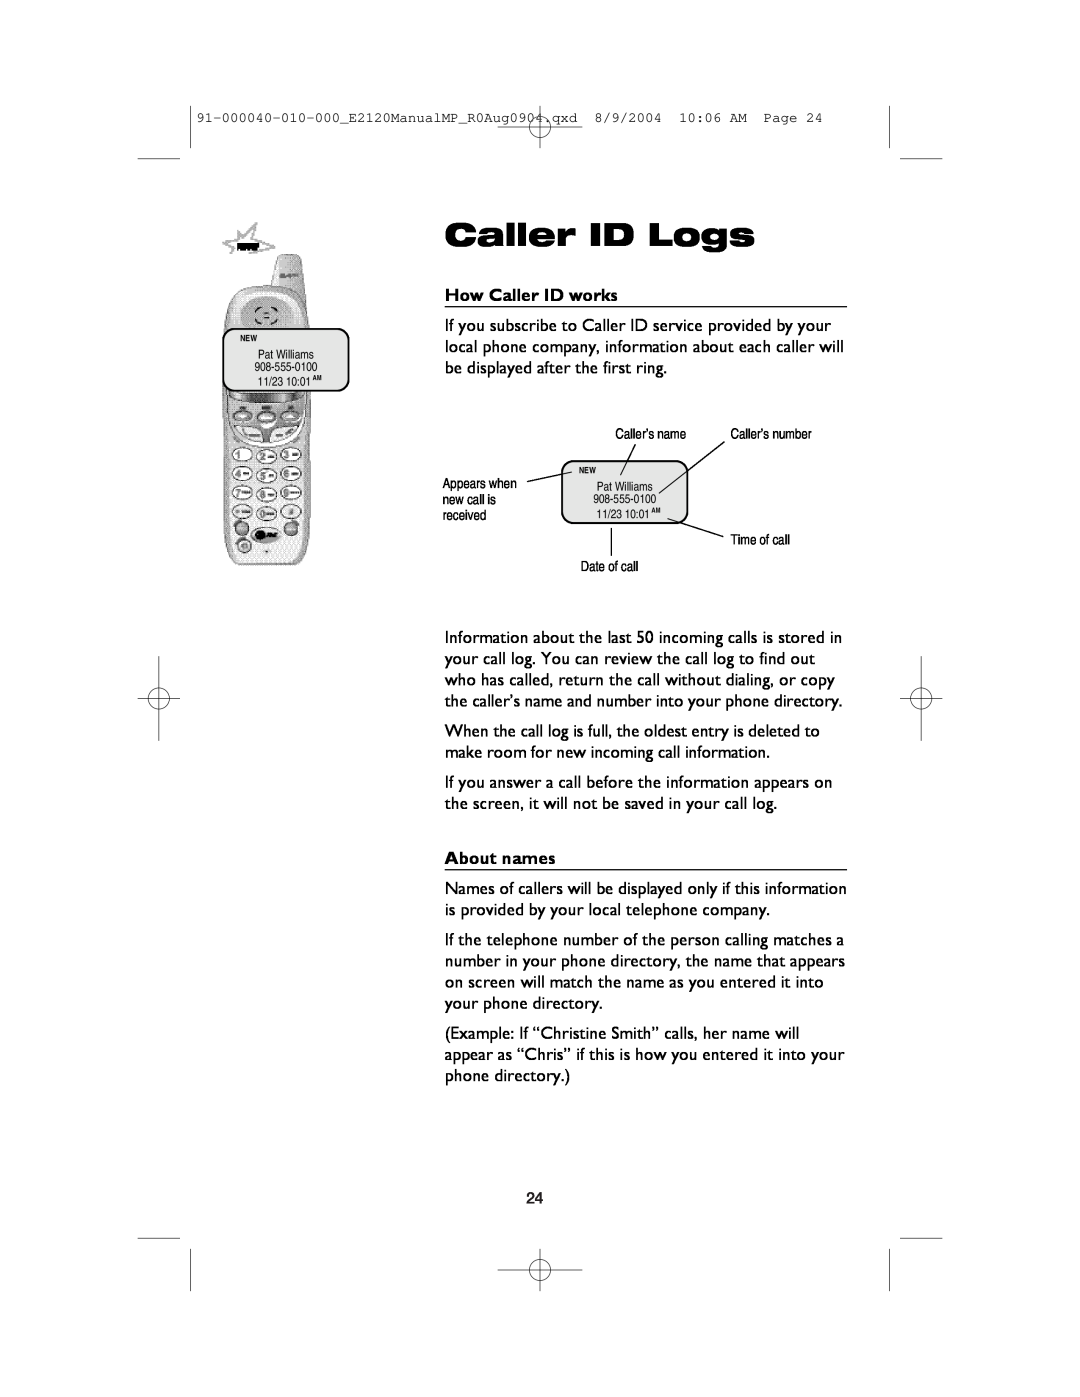 AT&T ATT-E2120 user manual Caller ID Logs, How Caller ID works, About names 